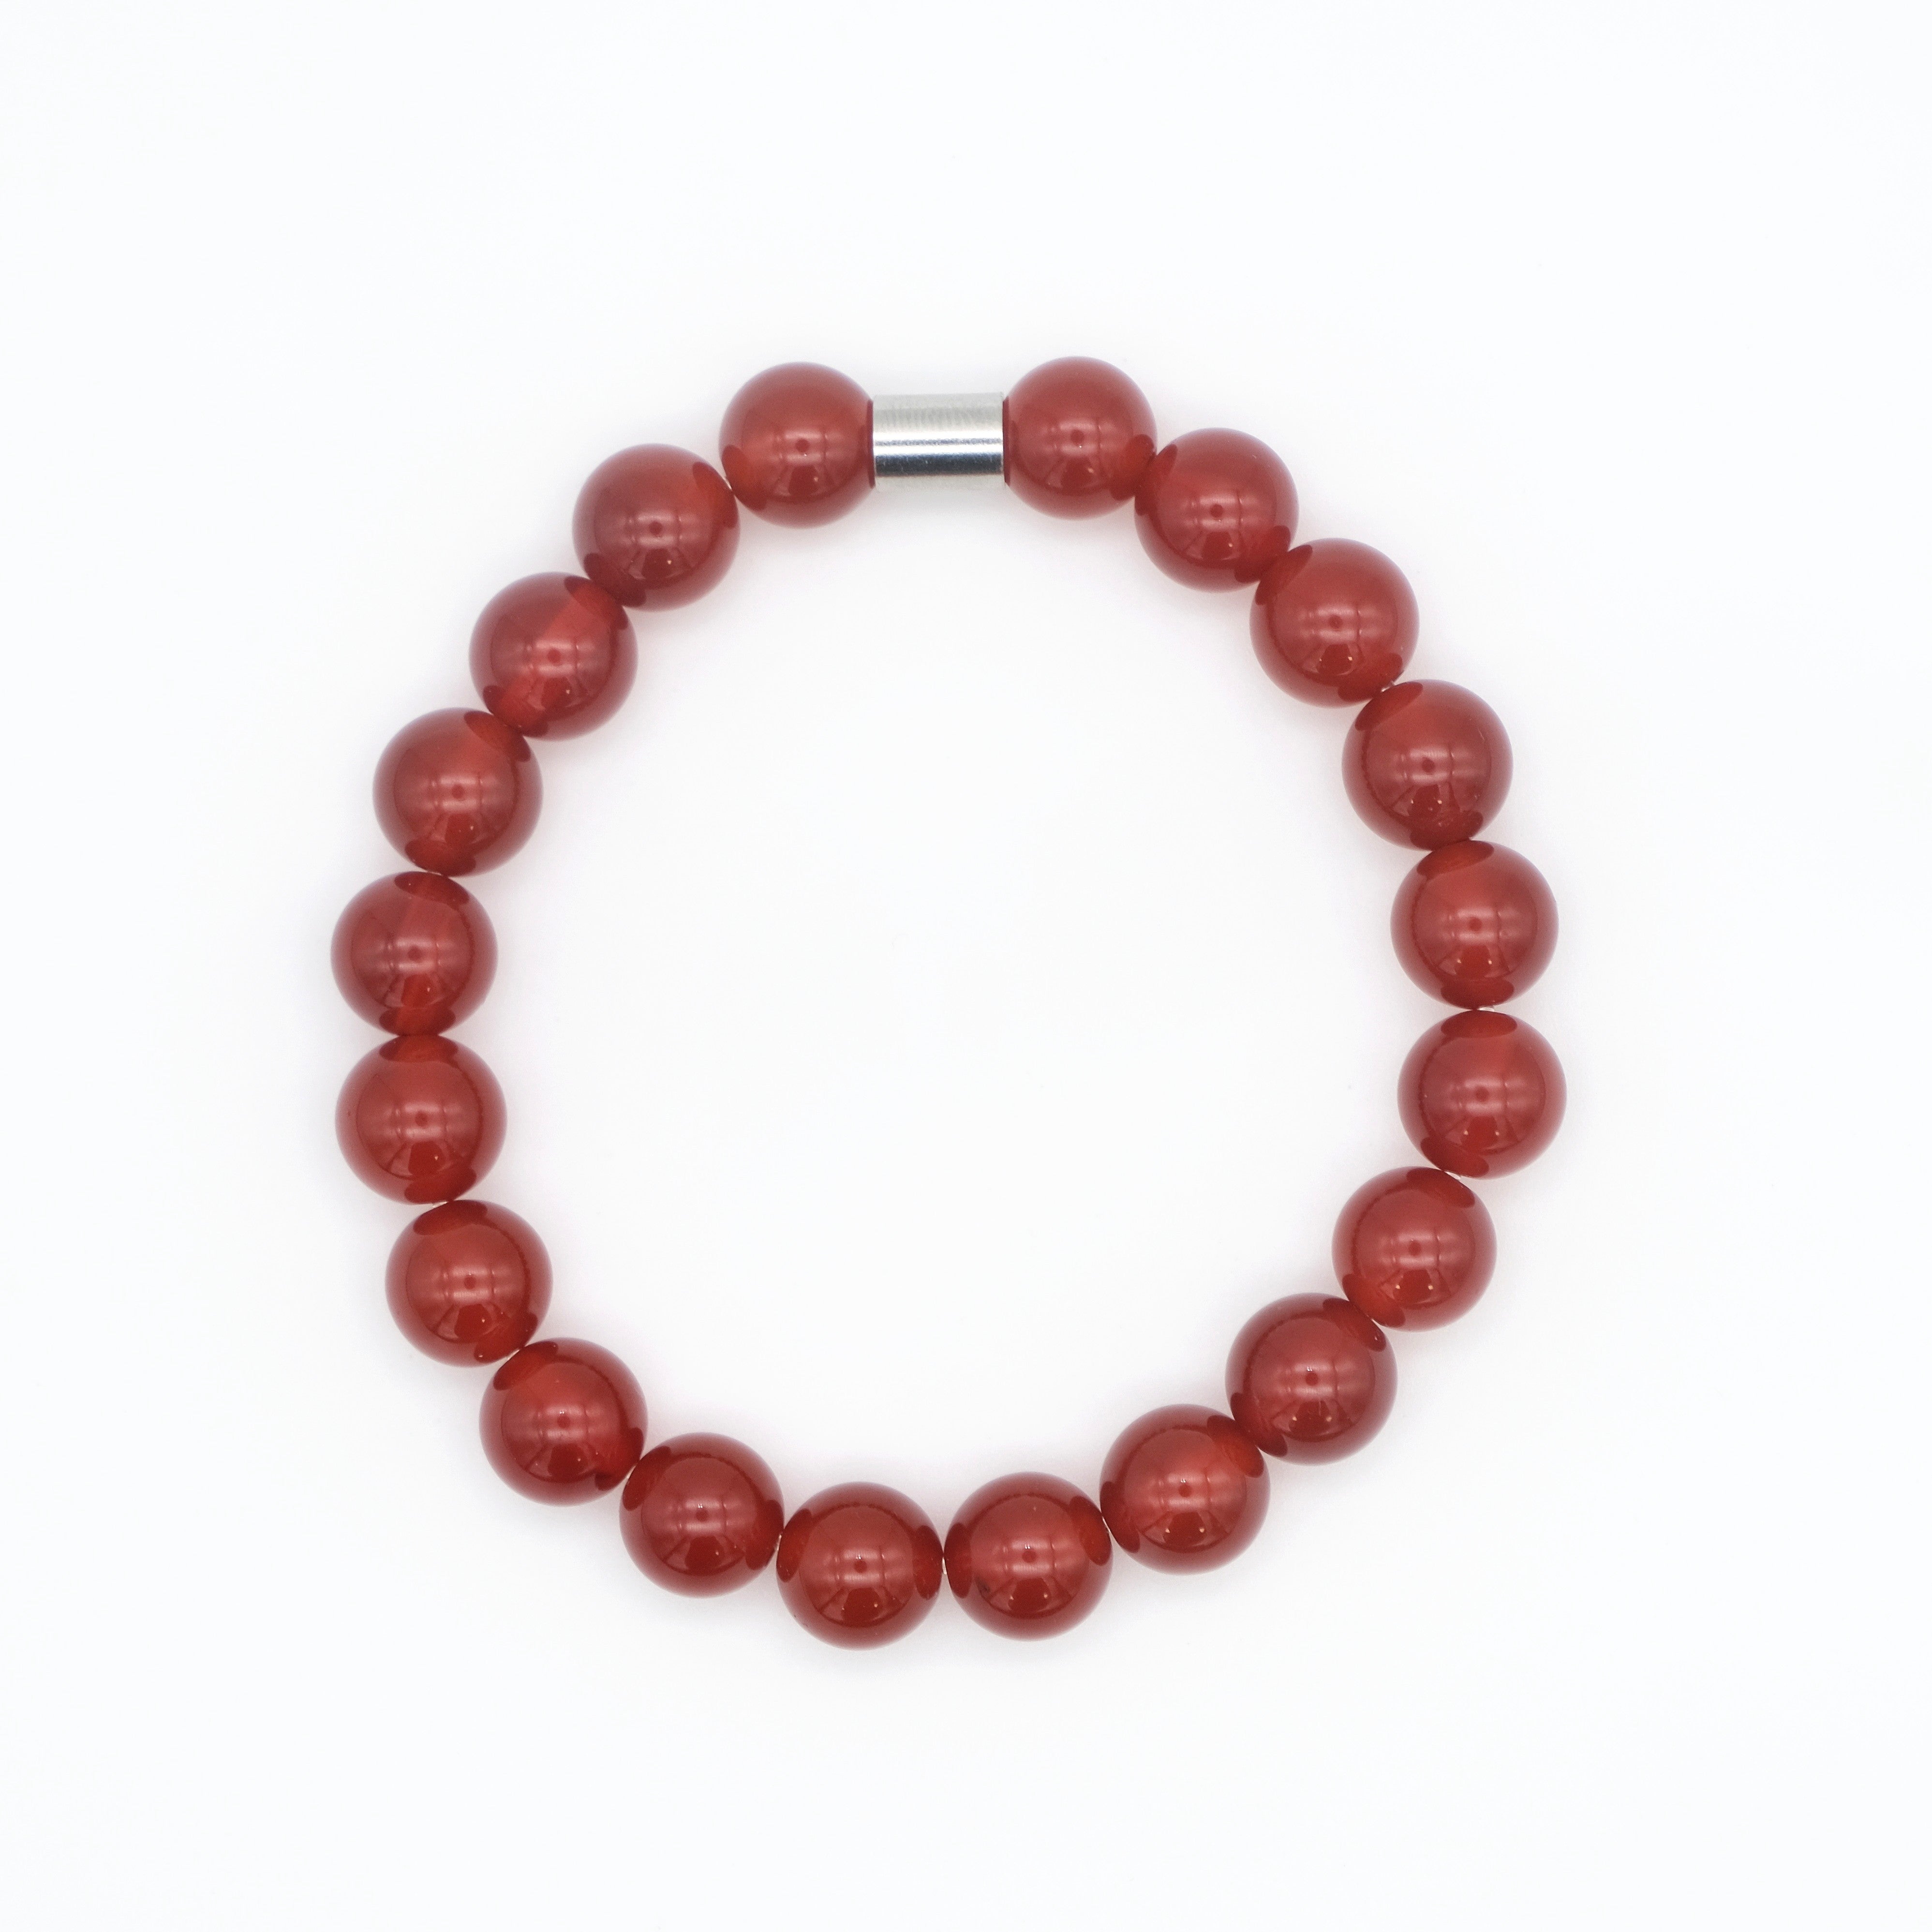 A carnelian gemstone bracelet in 10mm beads with stainless steel accessory from above